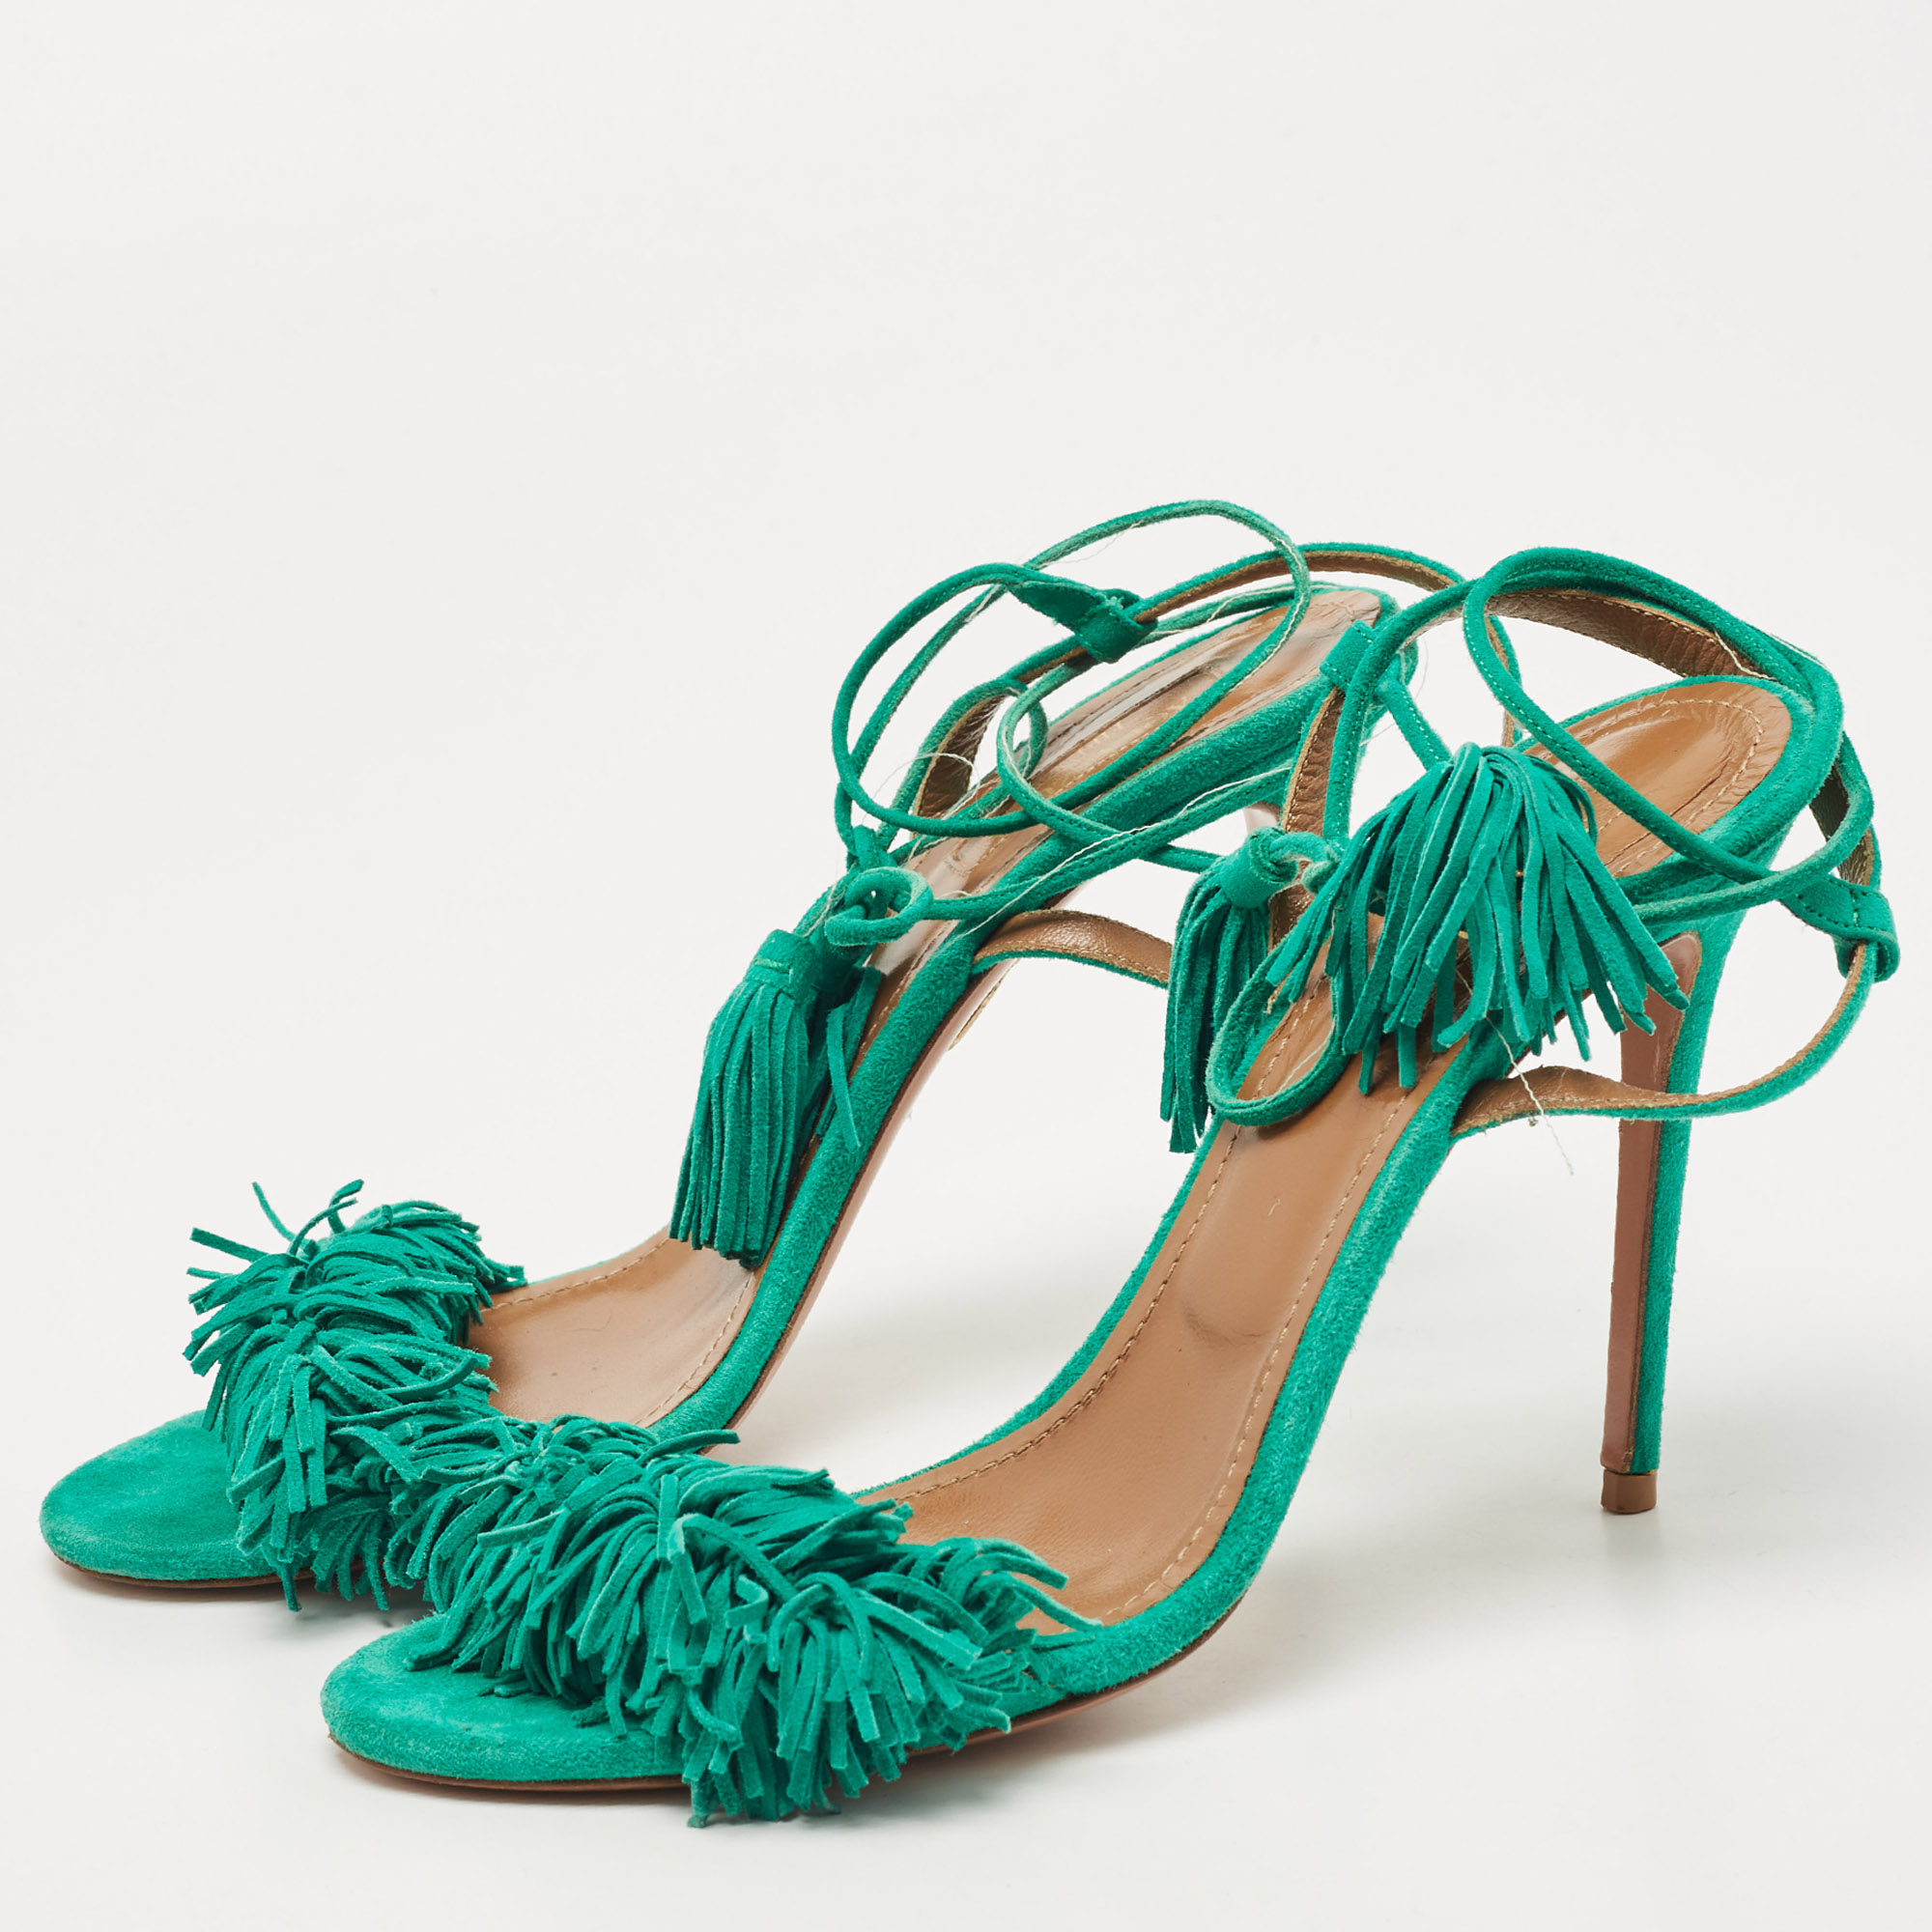 

Aquazzura Teal Green Fringed Suede Wild Thing Tasseled Ankle Wrap Sandals Size